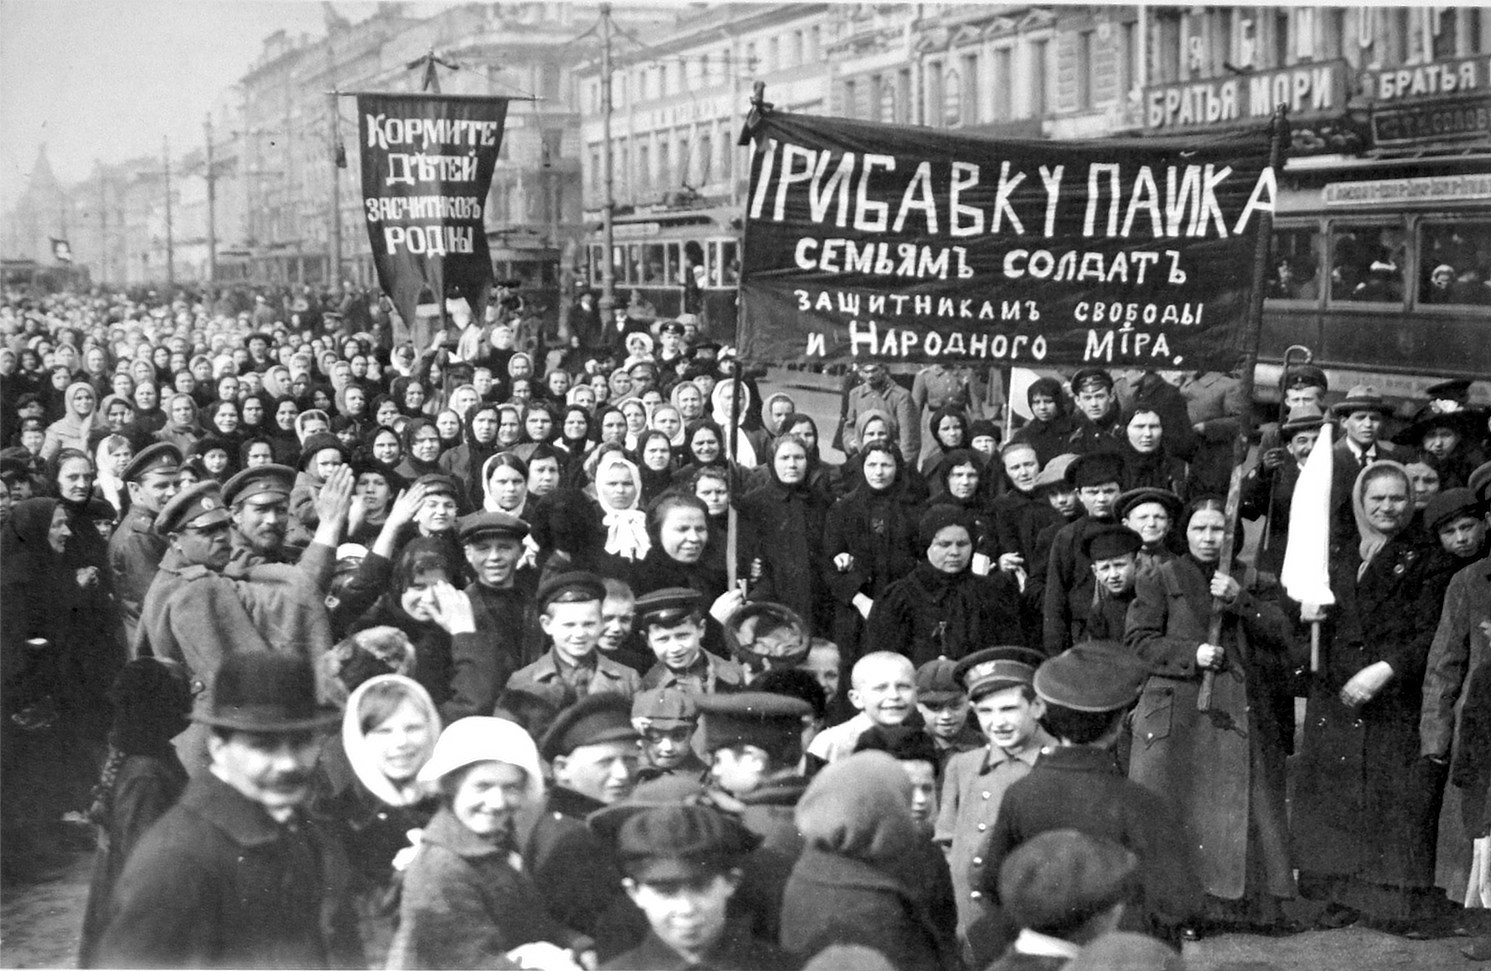 The start of the Russian Revolution, on International Working Women's Day, 1917,